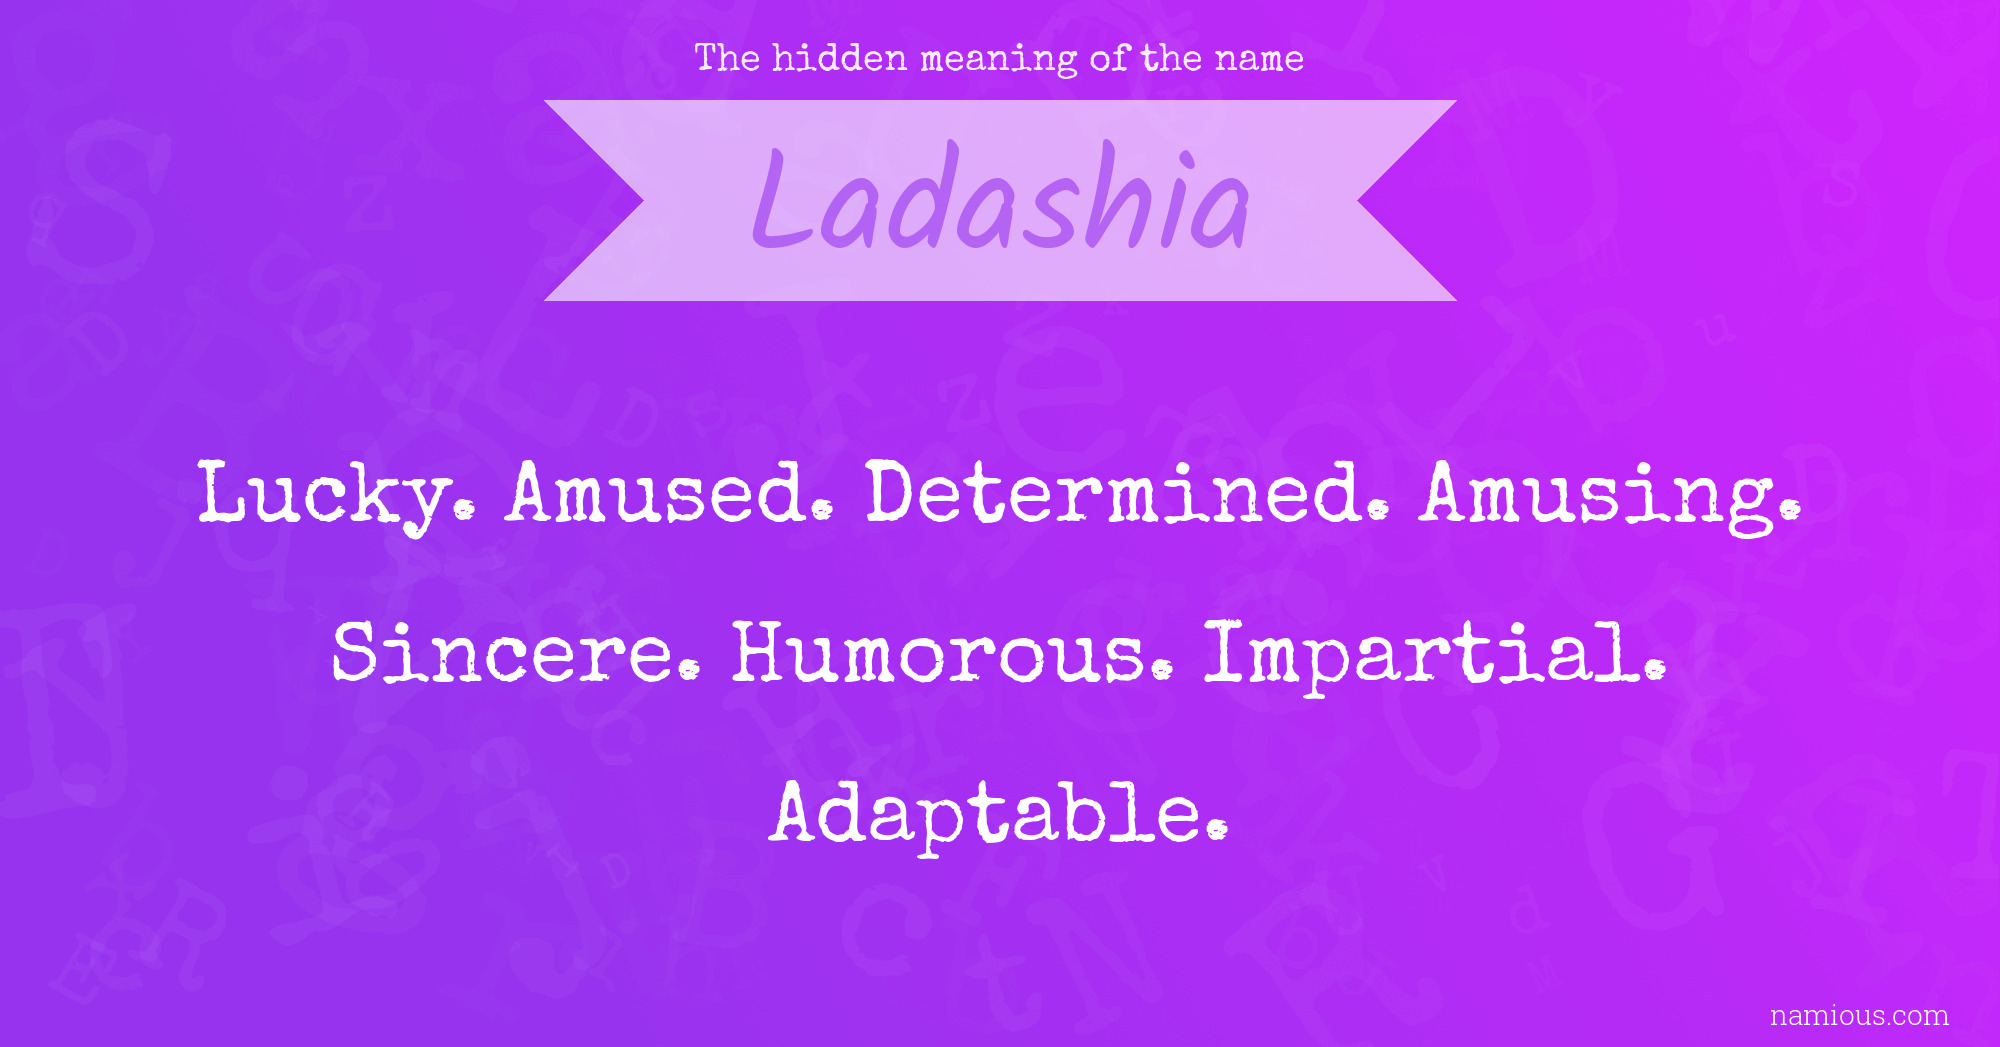 The hidden meaning of the name Ladashia